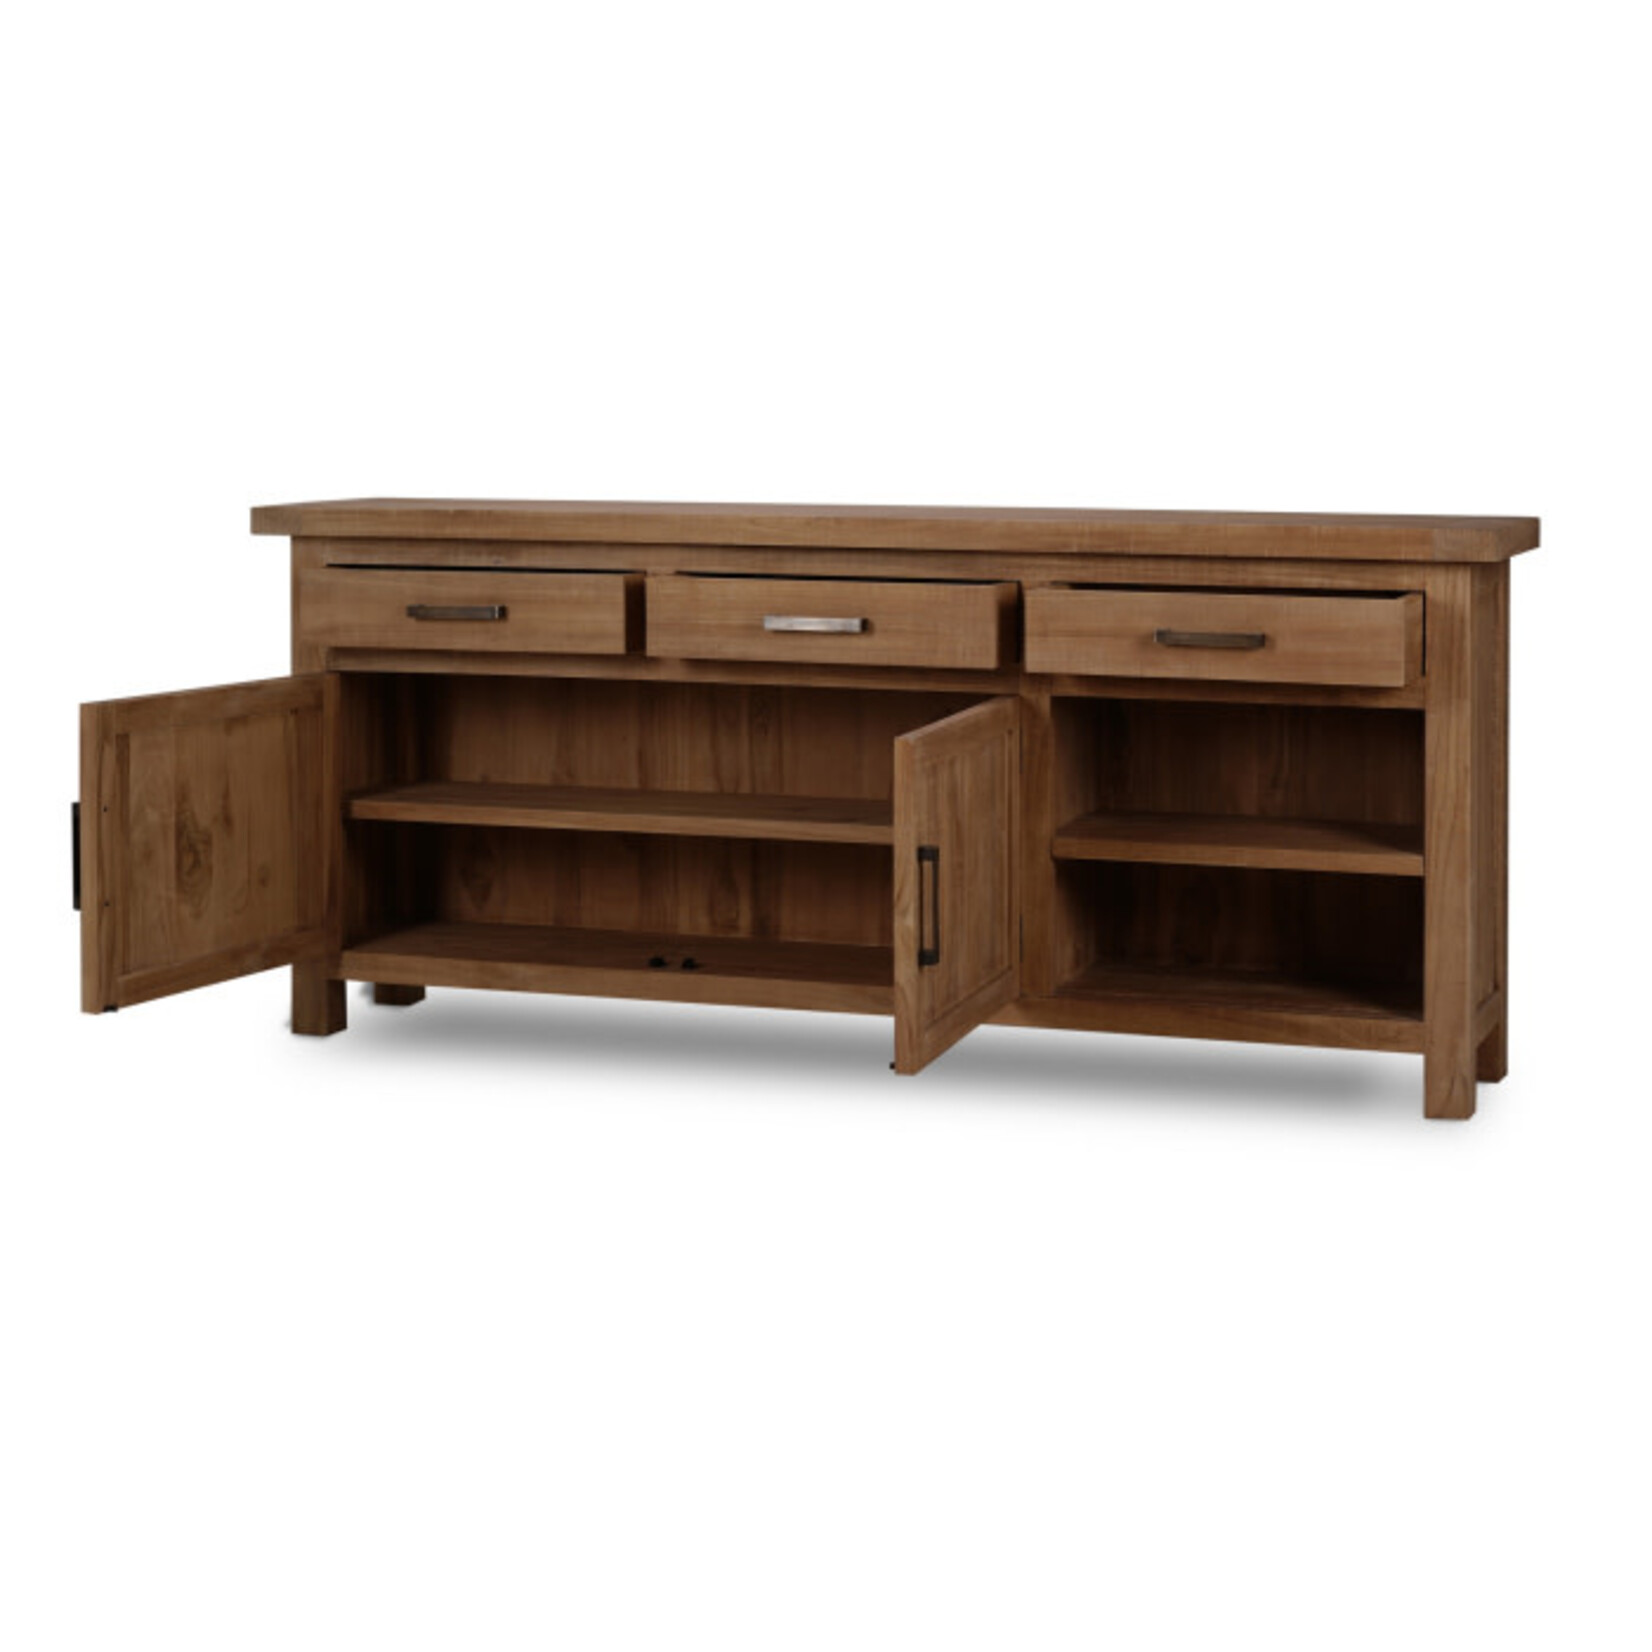 Outside The Box 84x16x36 Tuscan Solid Teak Wood 3 Drawer 2 Door Sideboard In Natural - TNT